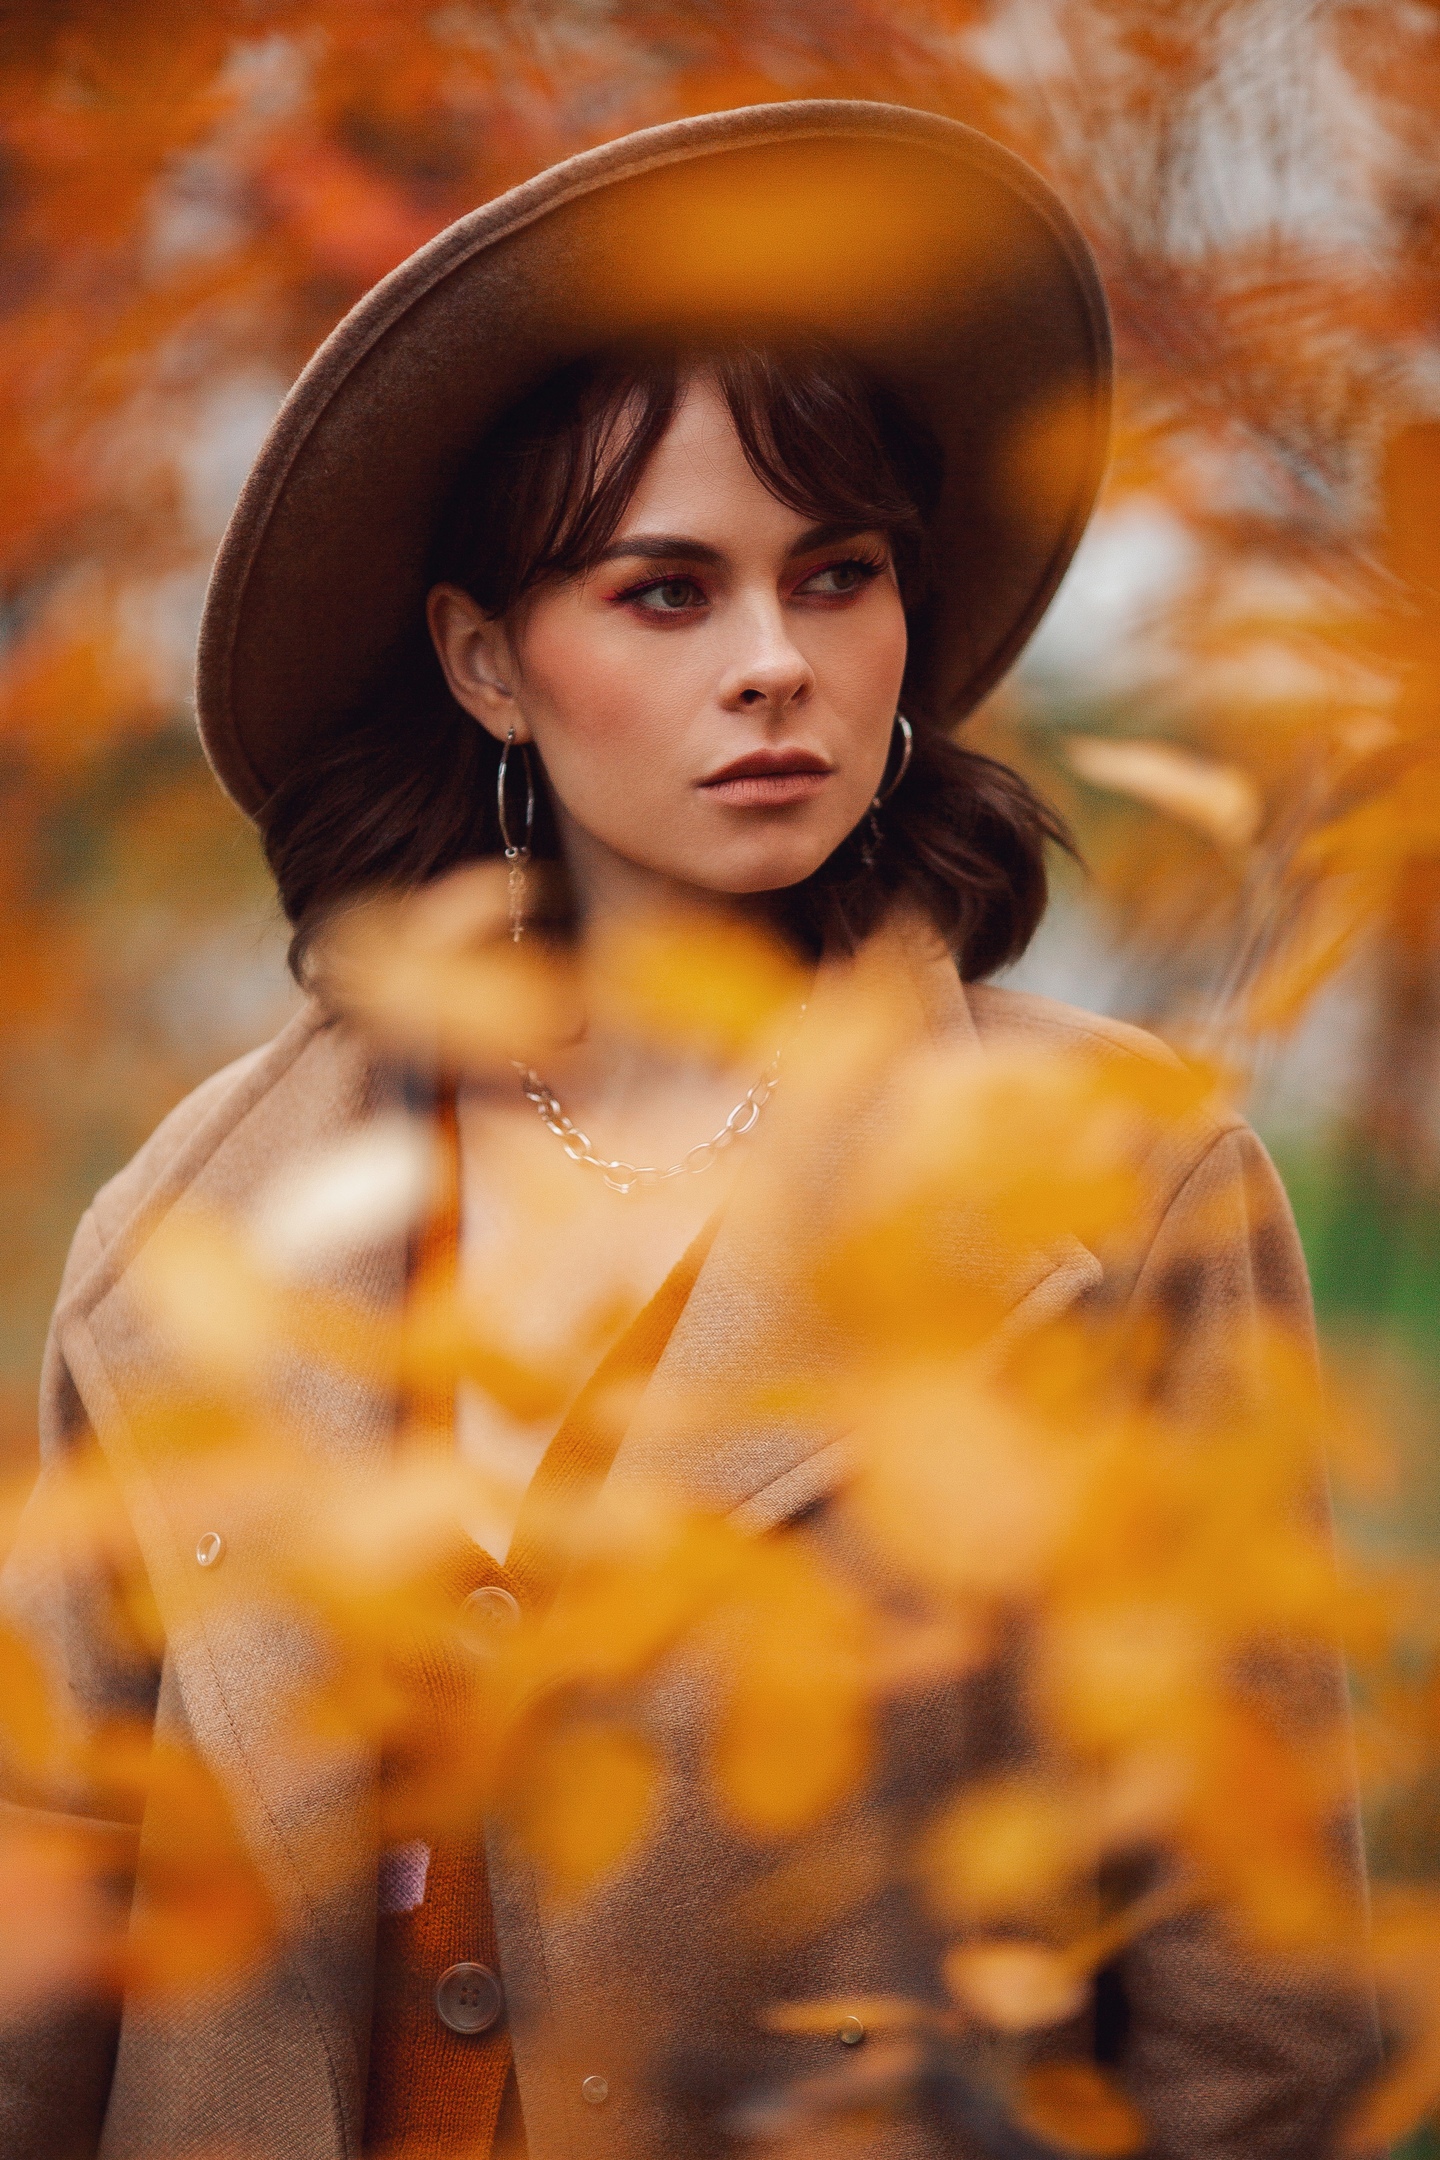 Woman in hat photoshoot in Autumn